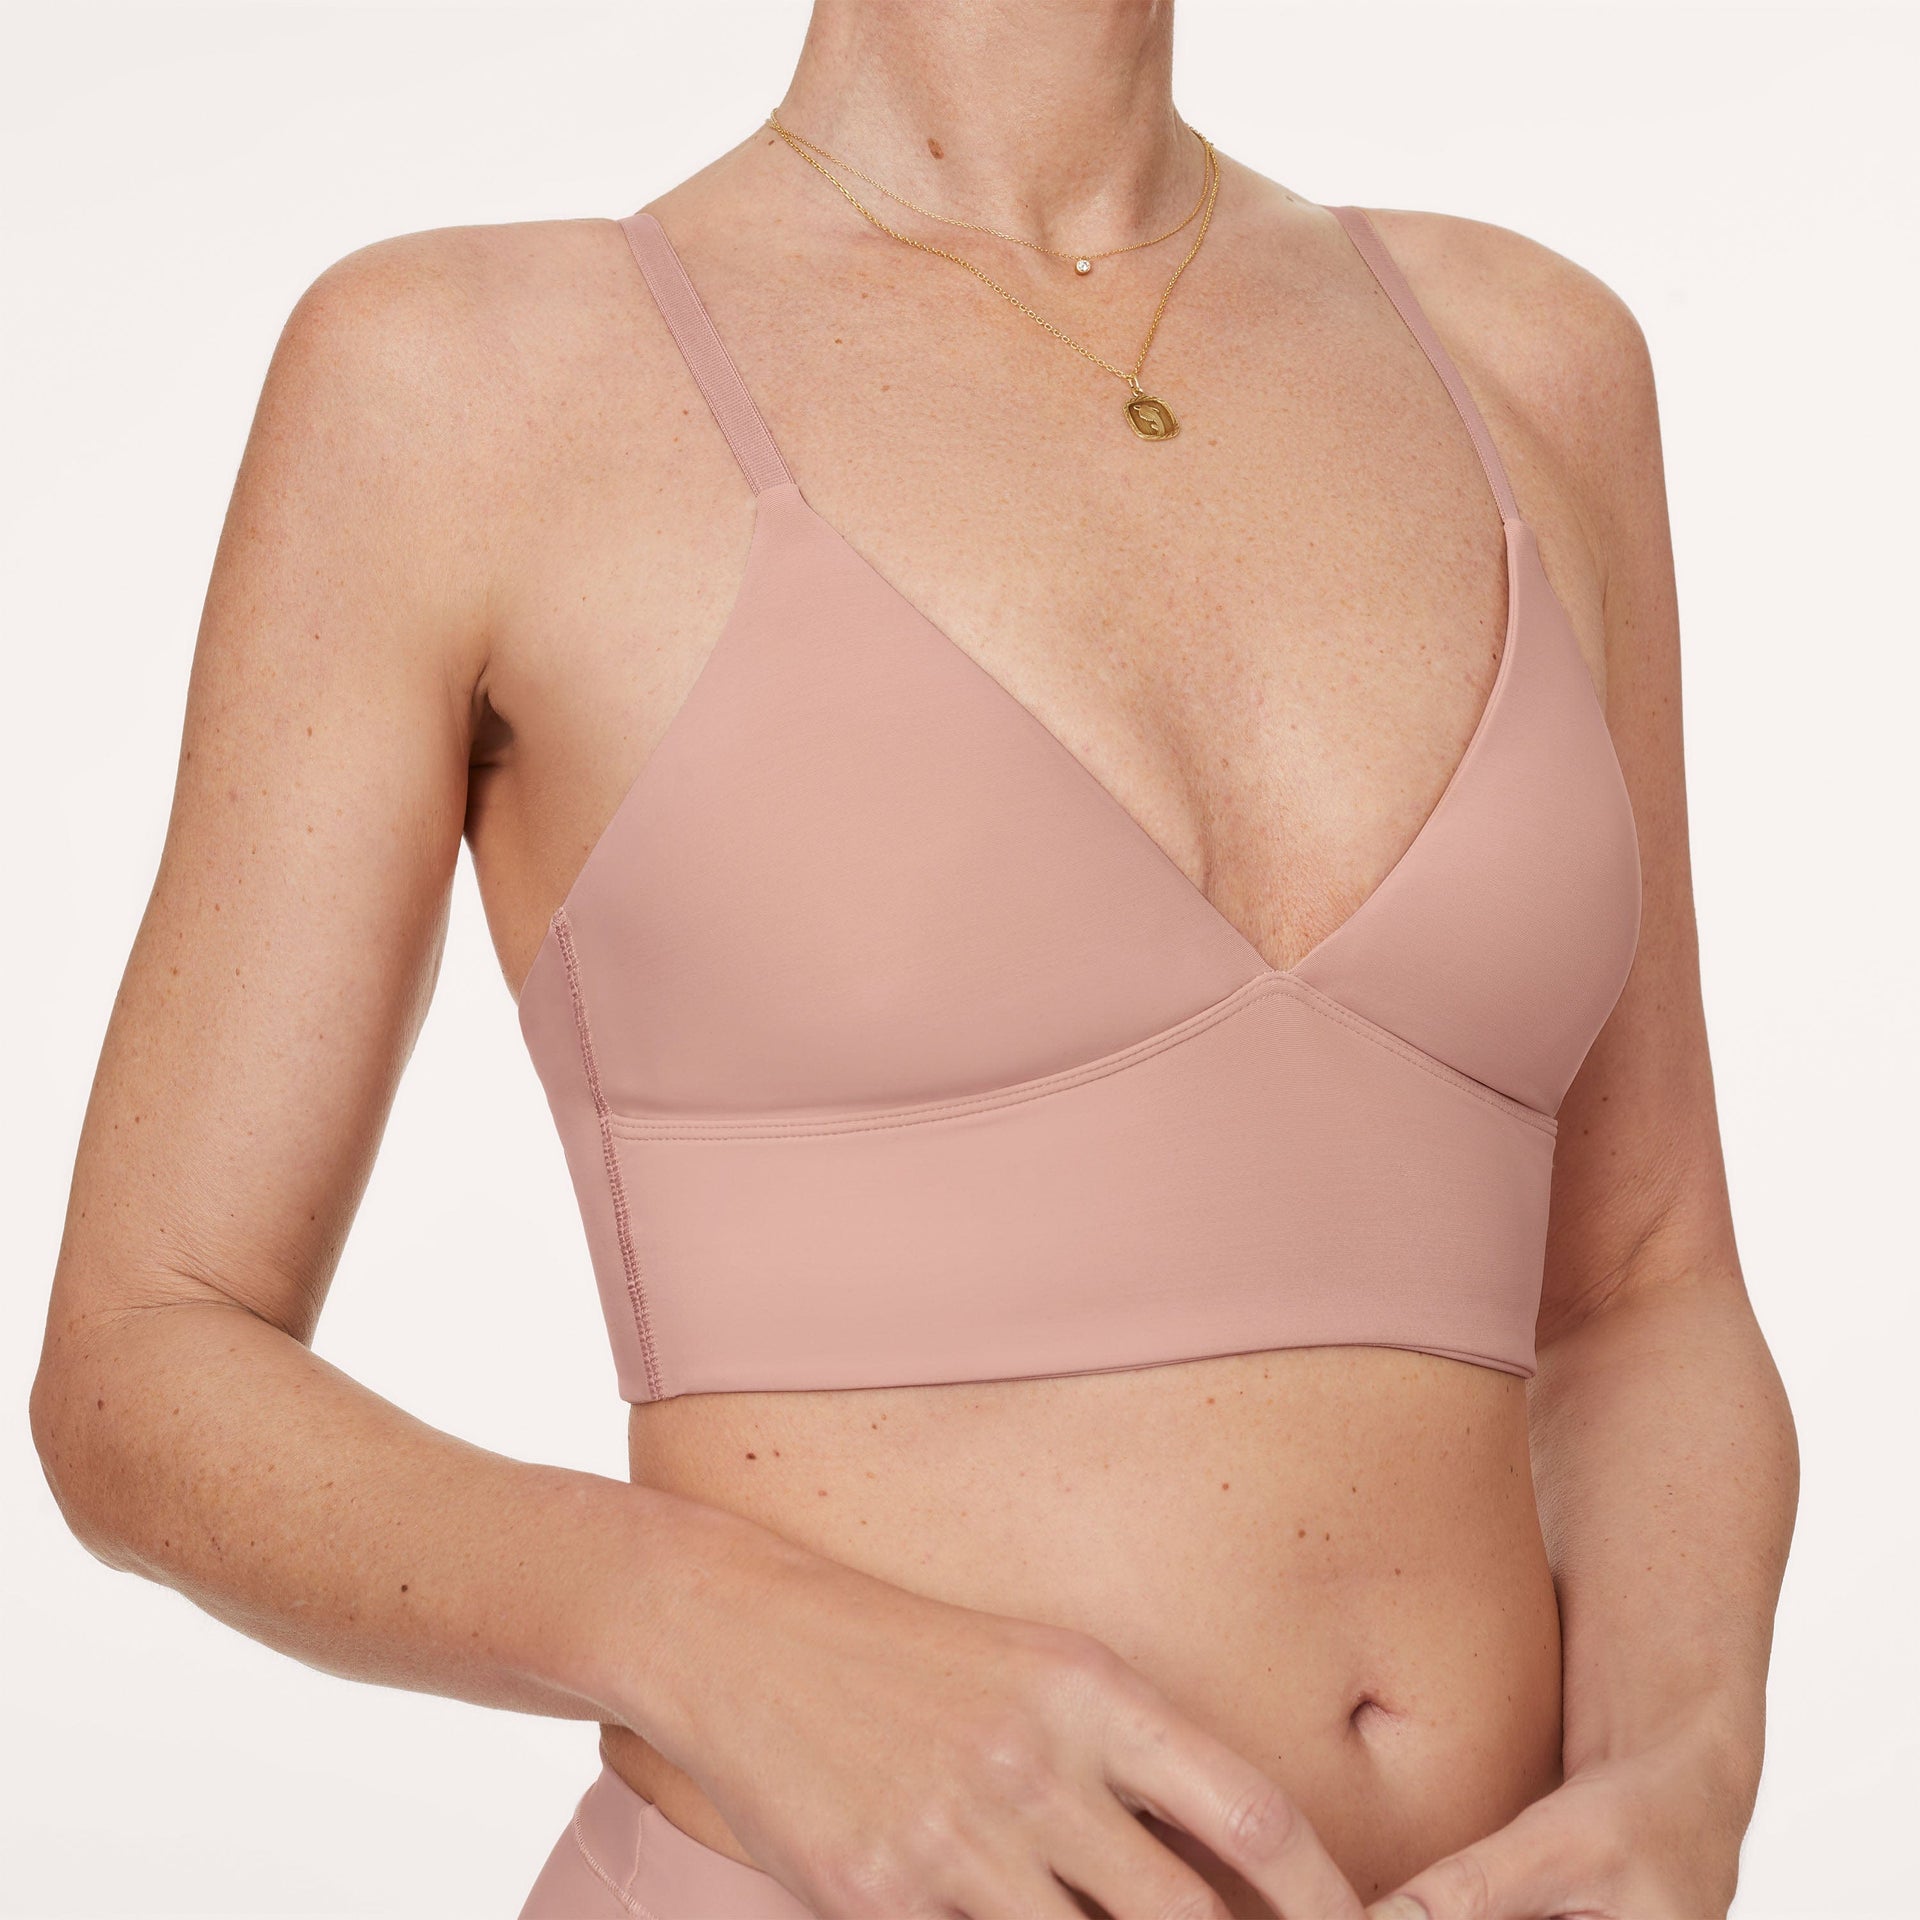 Pepper Lift Up Bra - Sienna Rose Pink Size 38 A - $32 (46% Off Retail) New  With Tags - From Emma